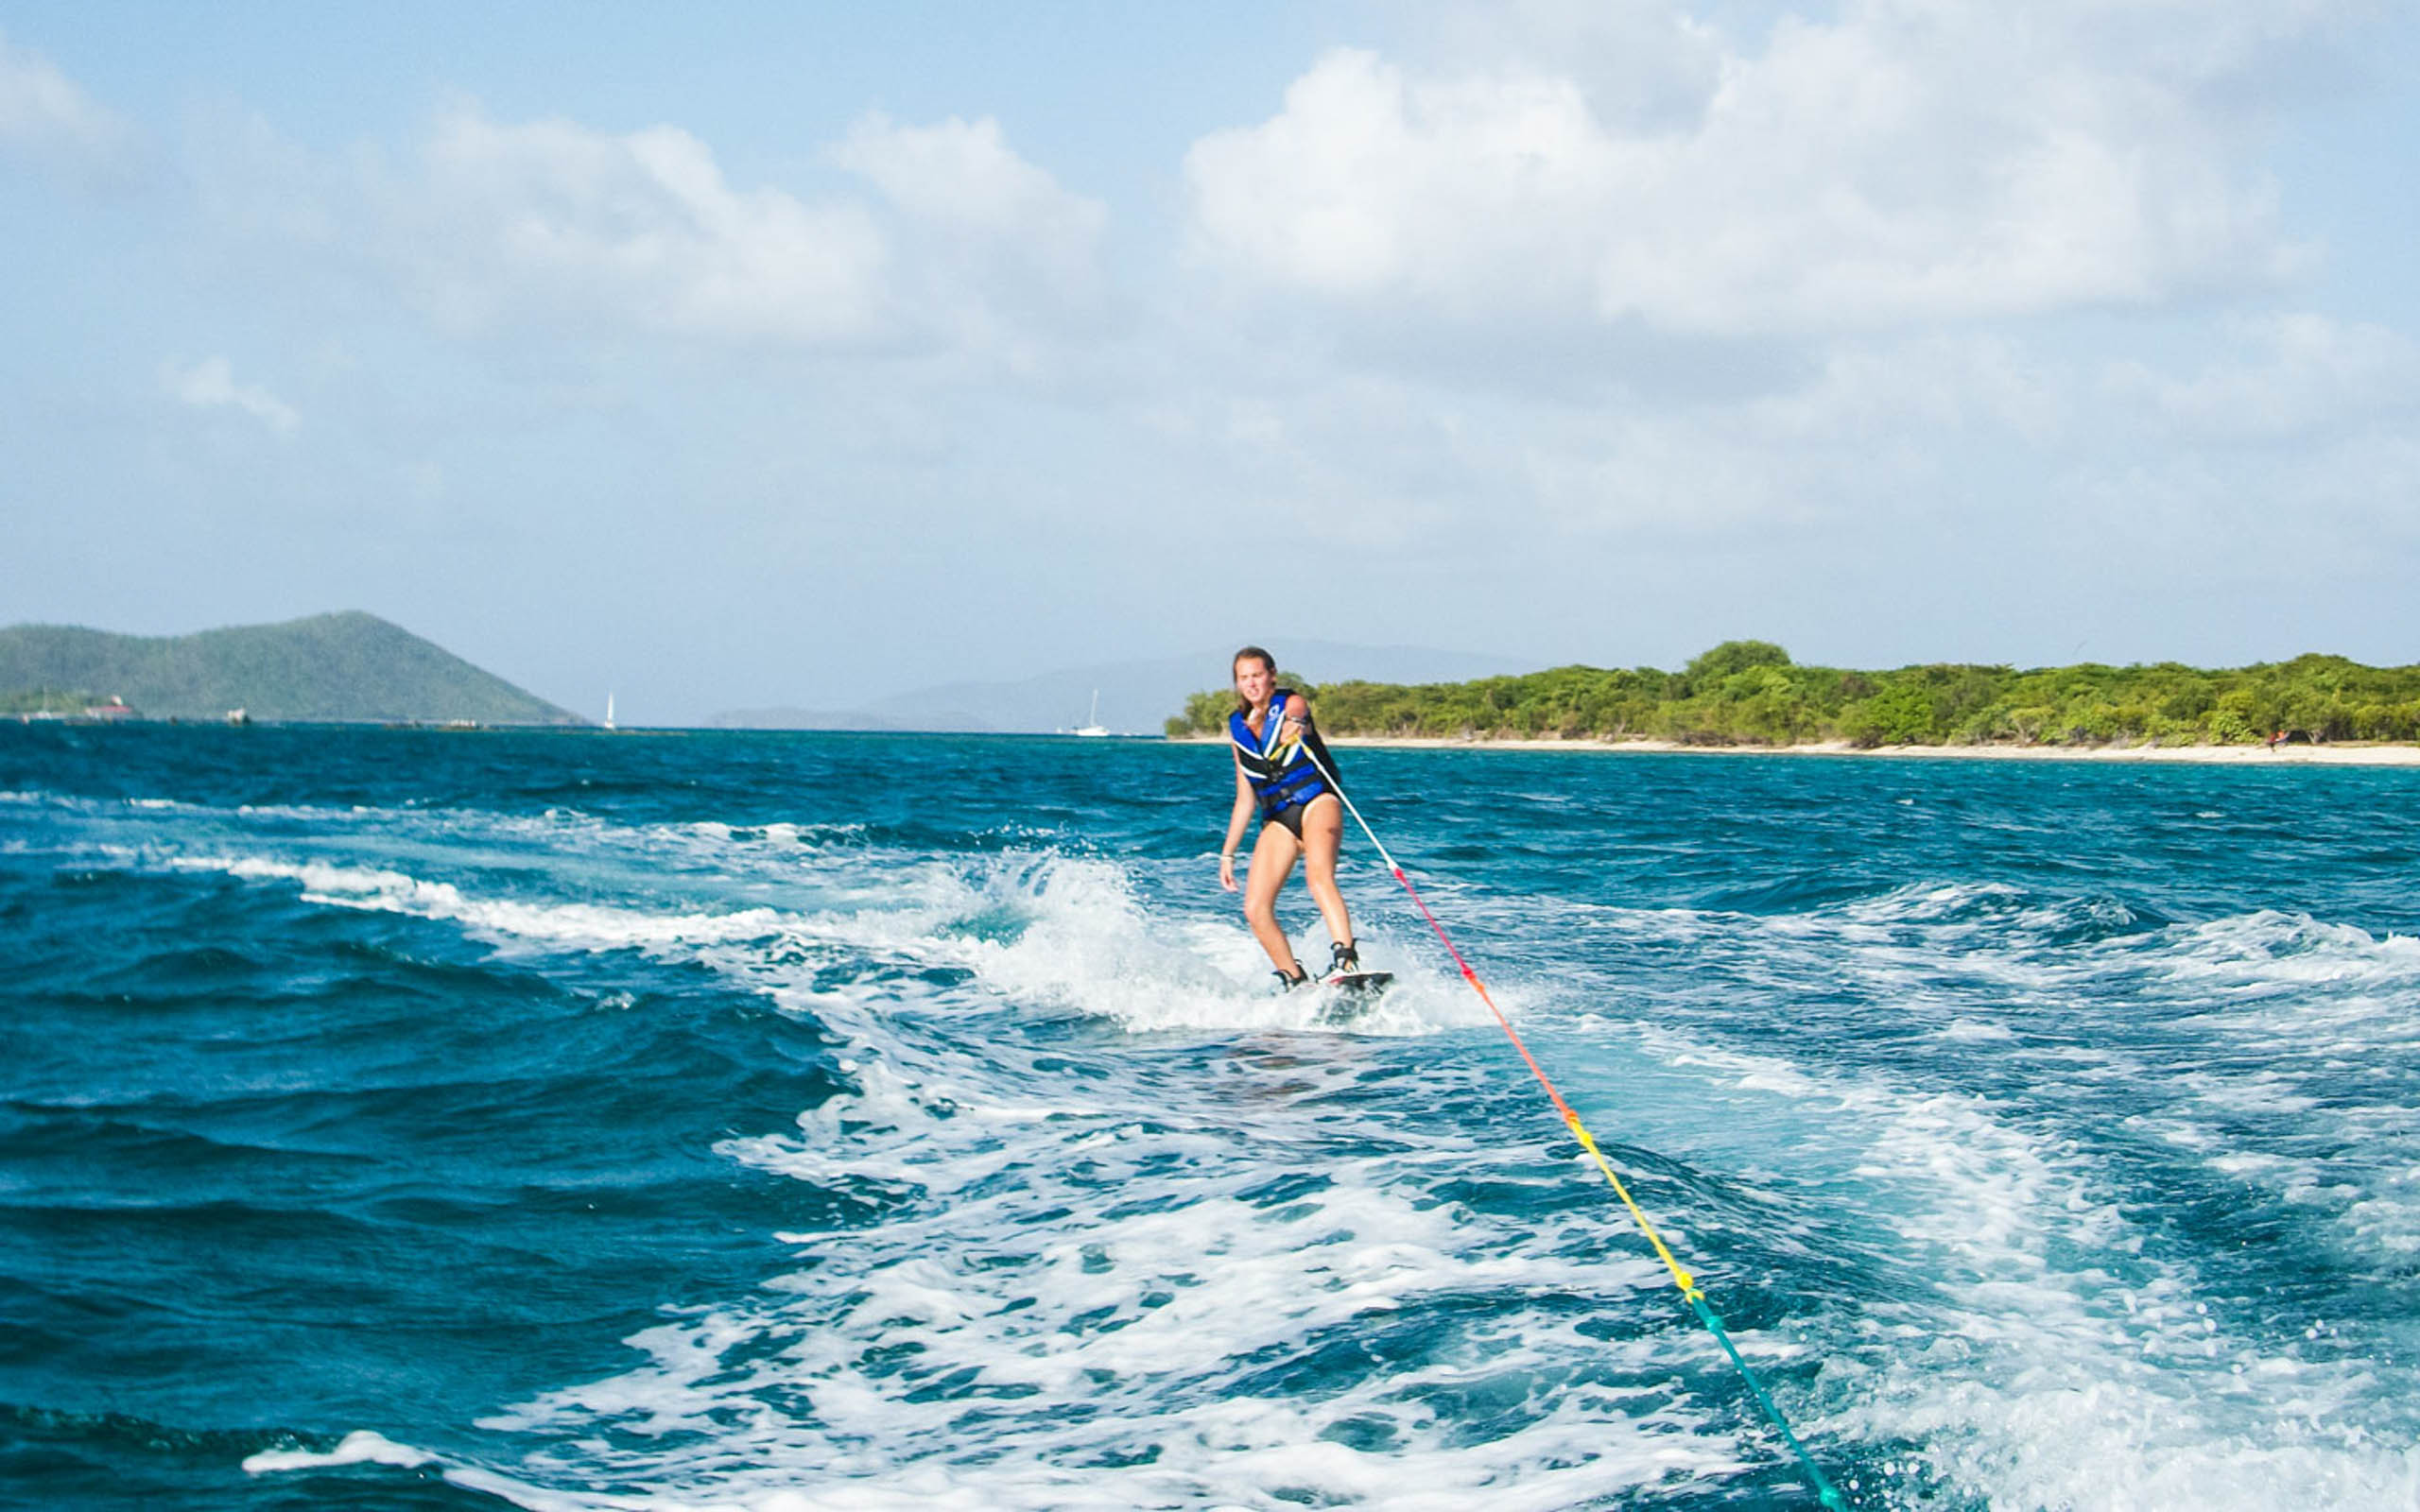 A woman is riding a water ski in the ocean.